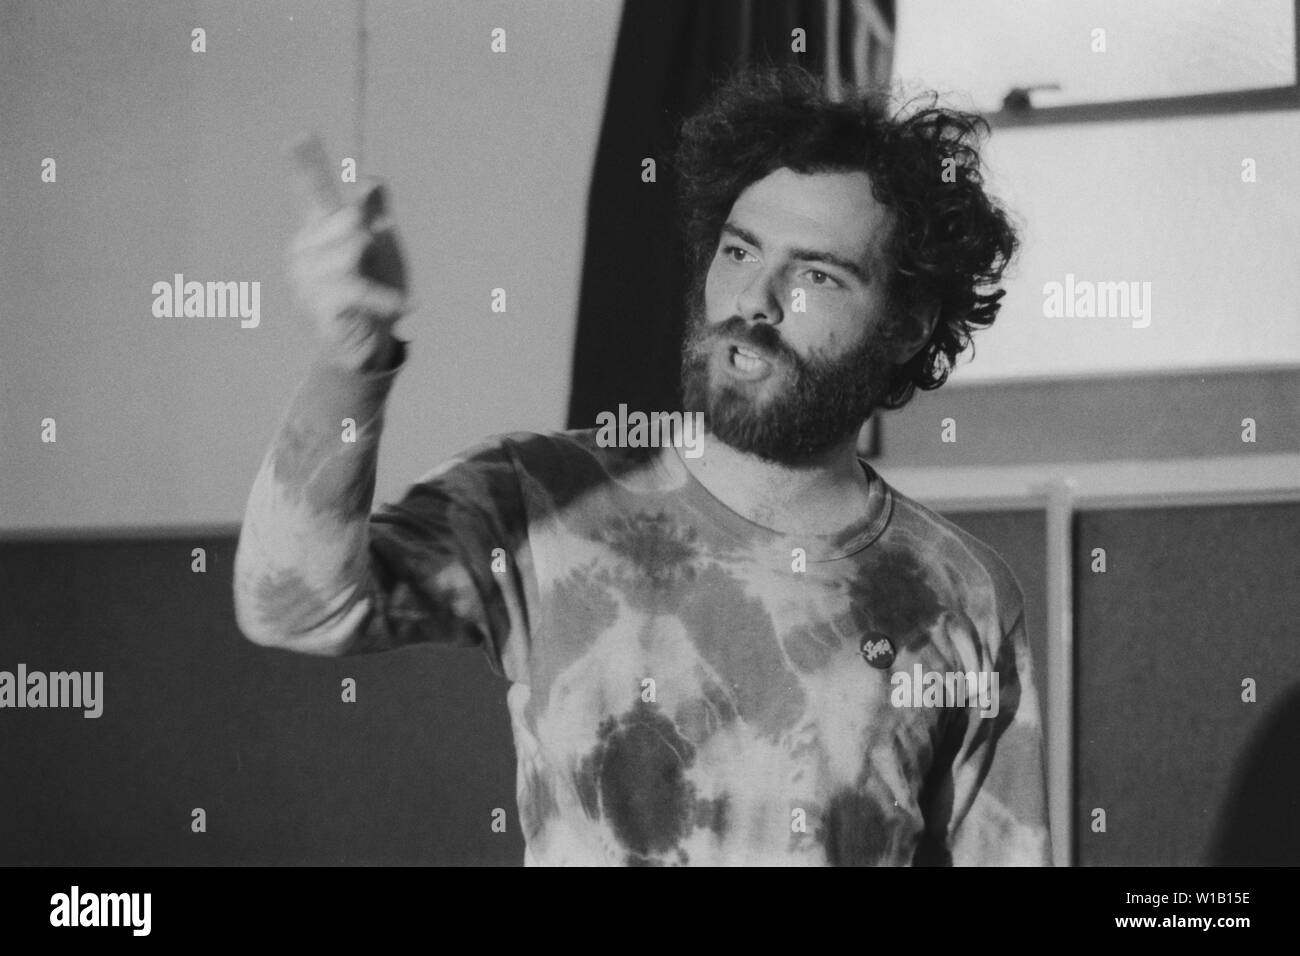 Leftist radical Yippie  ( Youth International Party )  co founder Jerry Rubin speaks to a crowd in a Cincinnati, Ohio synagogue in 1968. Stock Photo